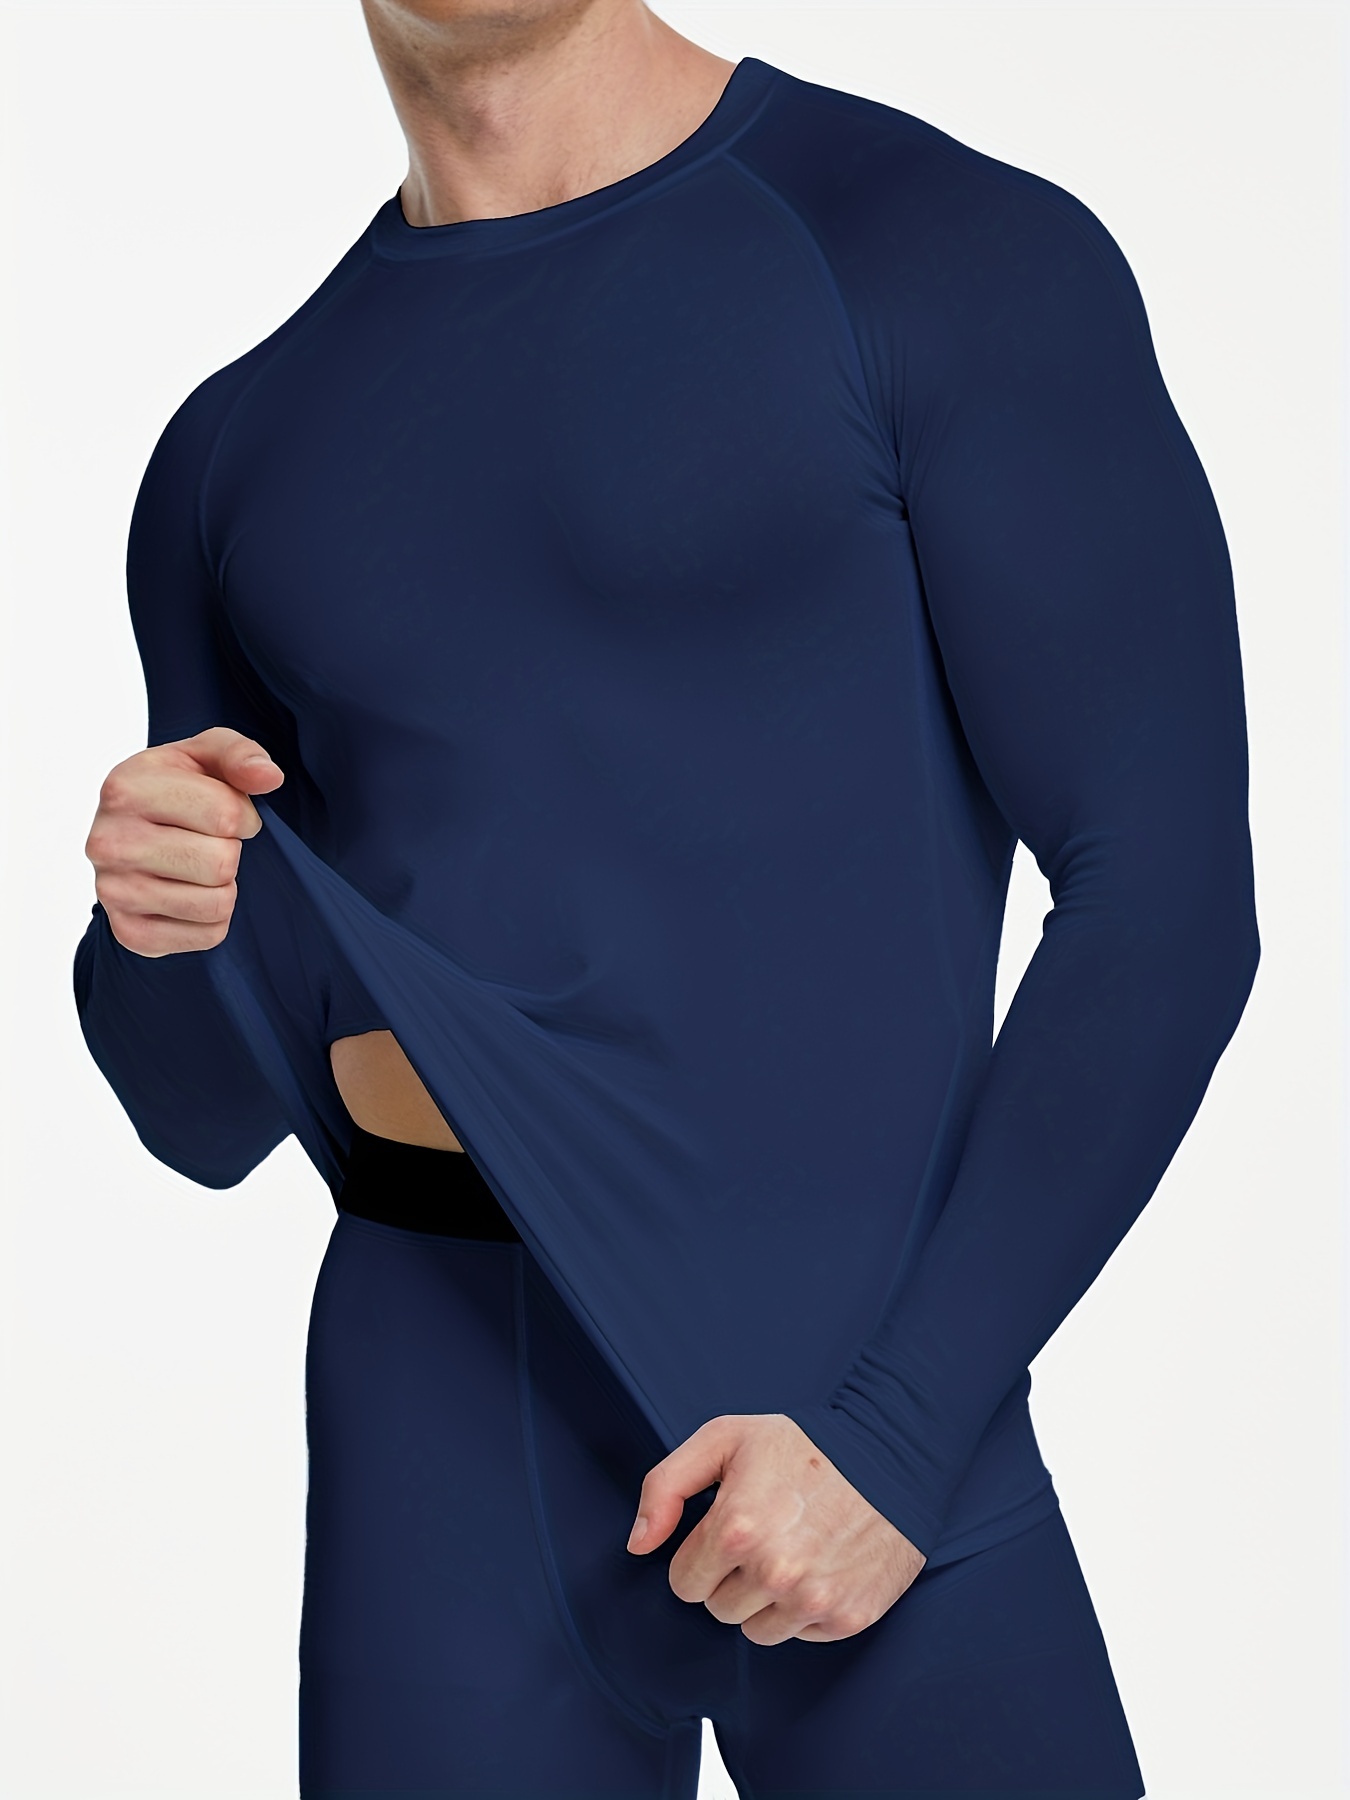 Buy Mens Compression Shirts Long Sleeve, Quick Dry Base Layer Thermal  Workout T-Shirts, Athletic Turtleneck Running Tops Black at